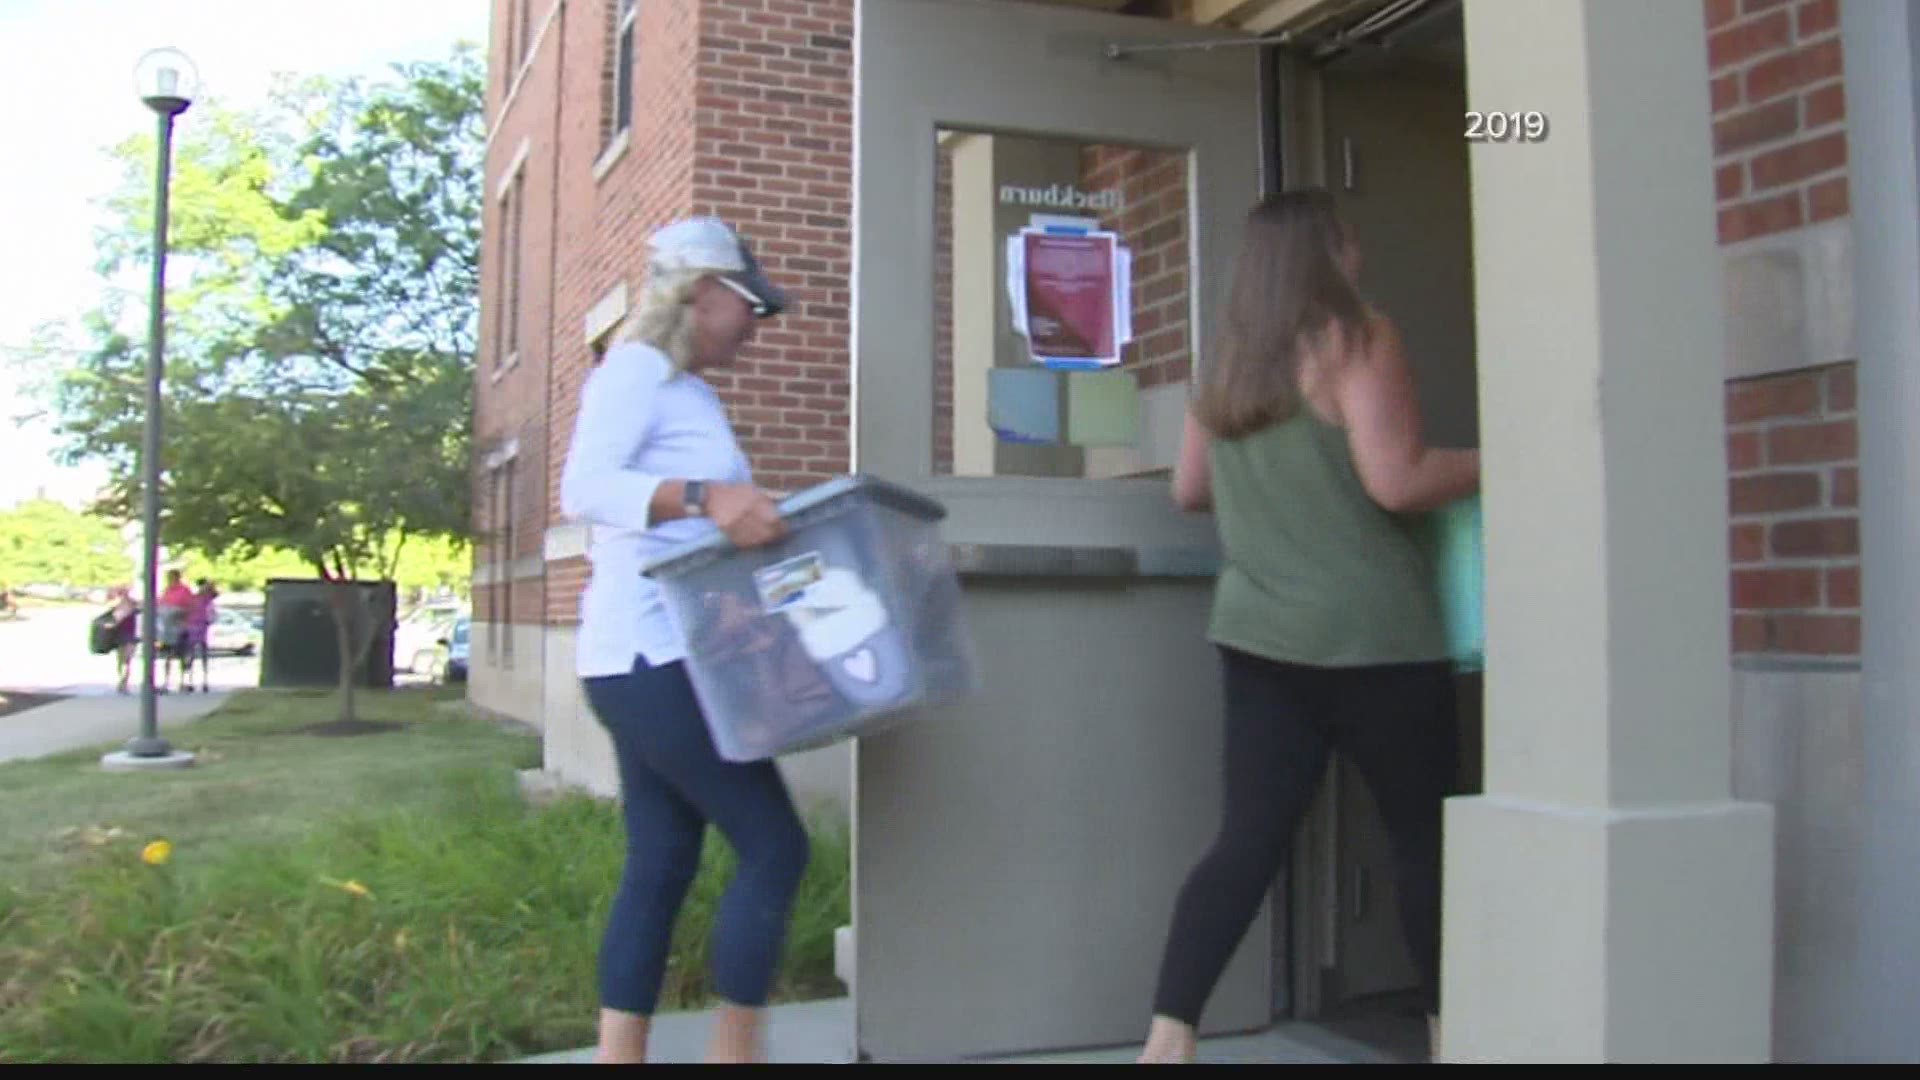 Colleges are looking for creative ways to house students this fall. IU says it has a room for every student but it also has some help in the community.